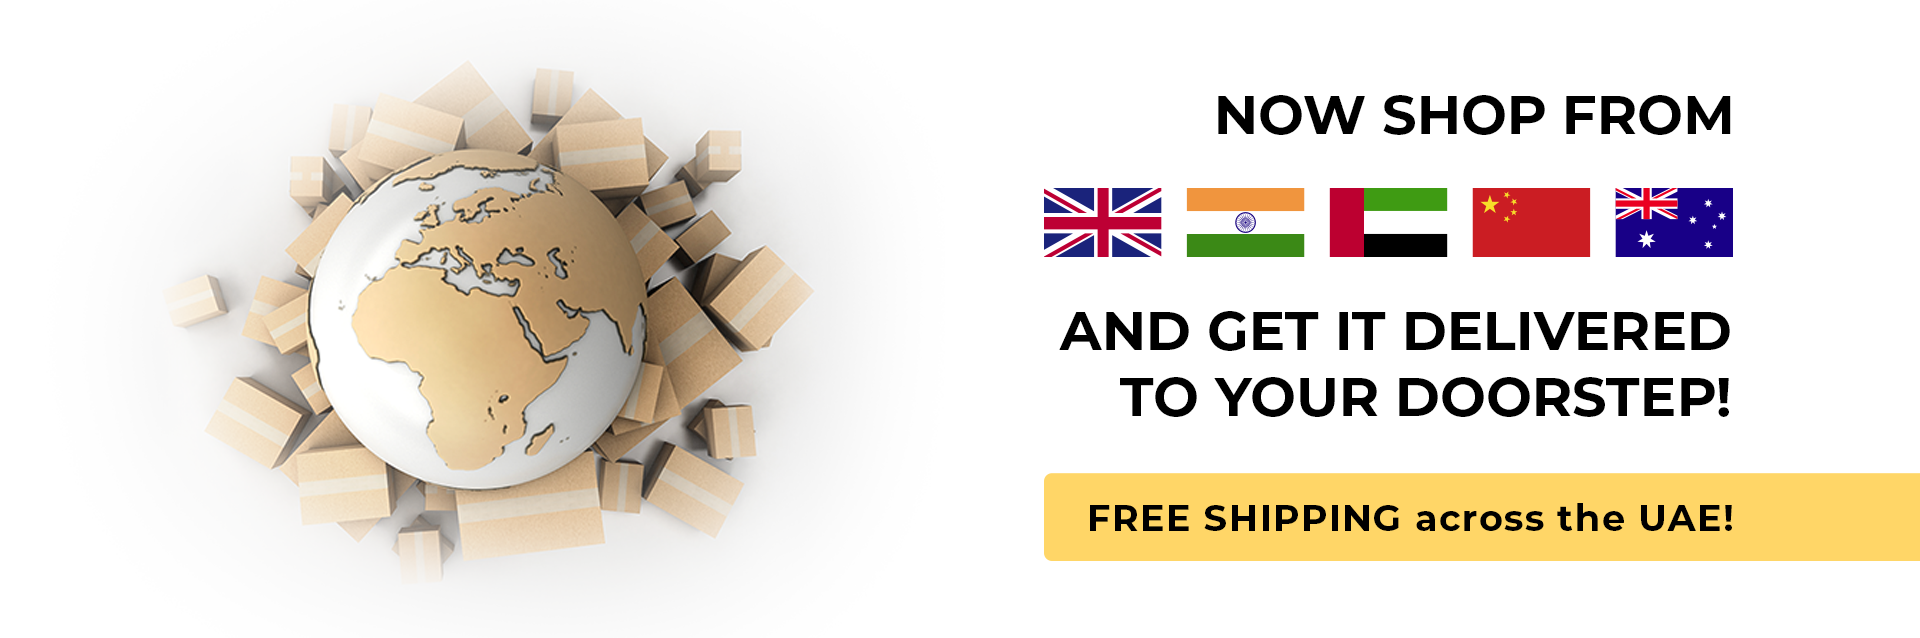 the world mall-enjoy the free shipping across the UAE